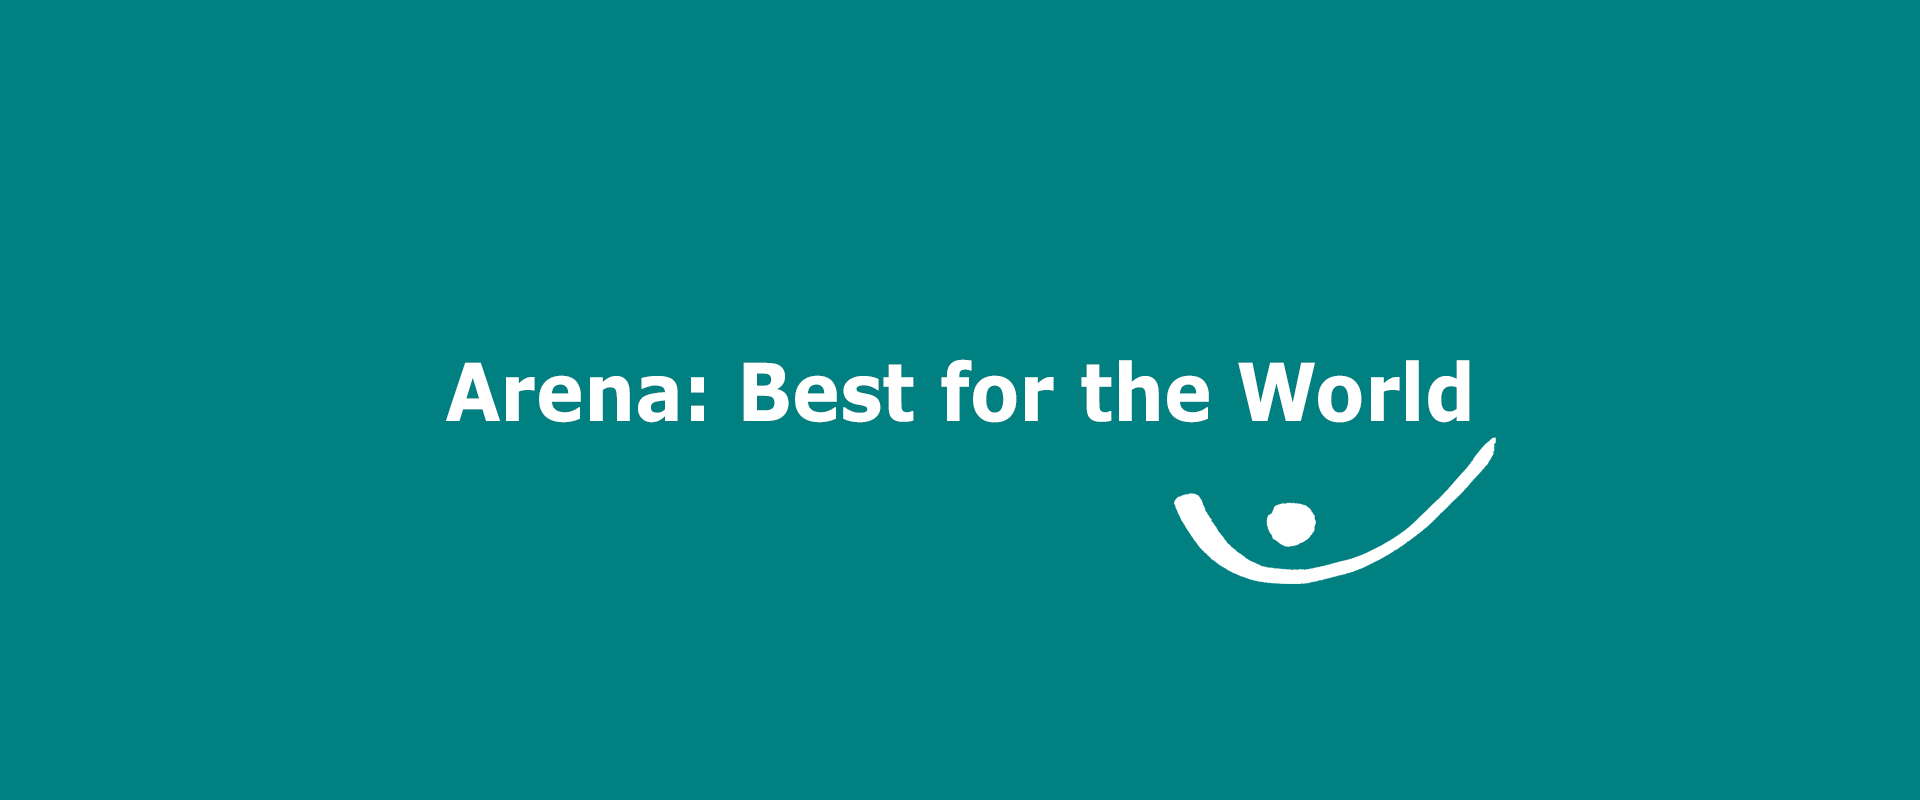 Ship of a new story: Arena Best for the world